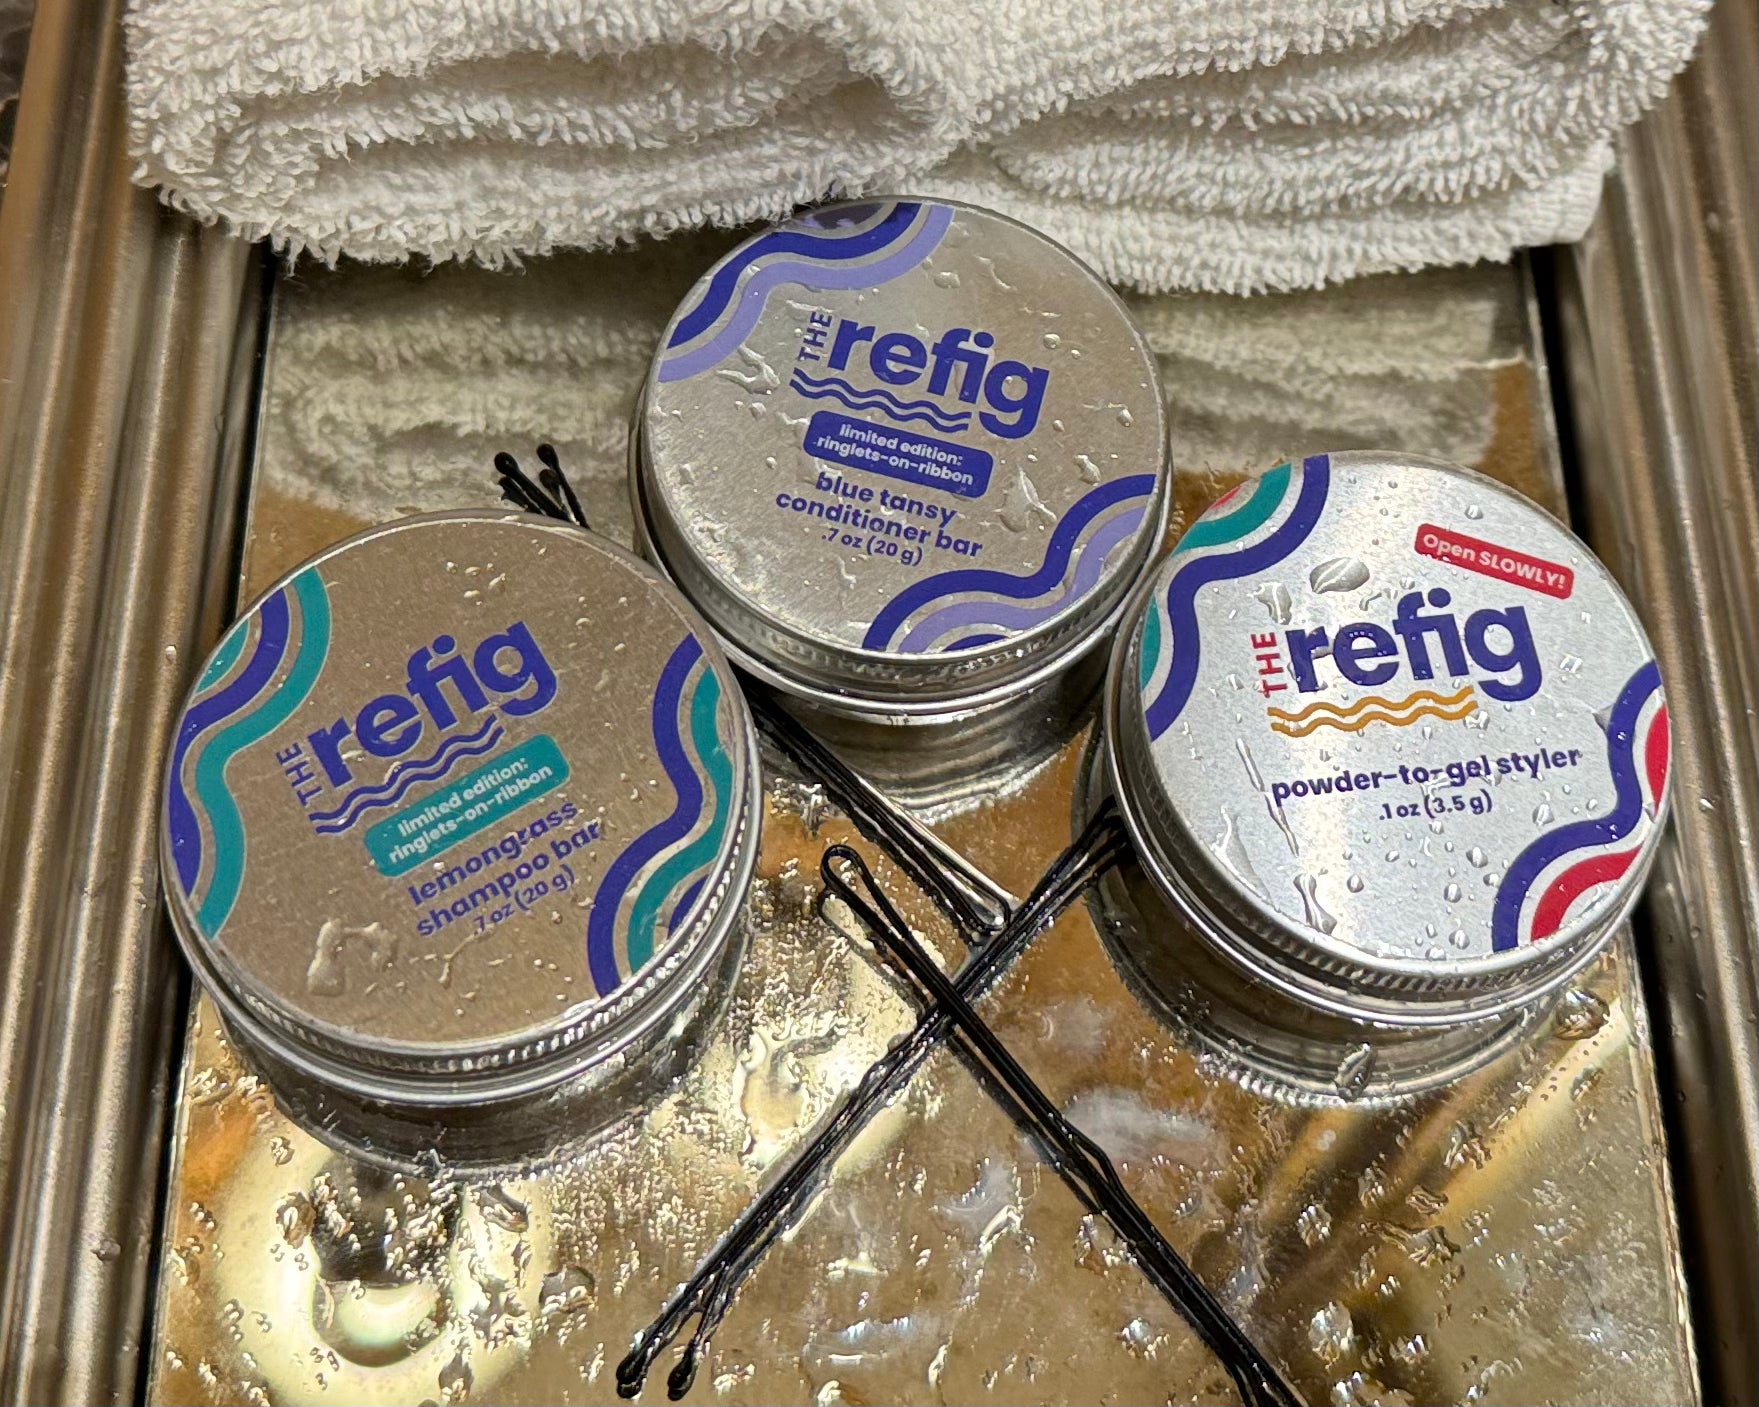 Wash-and-Go Starter Kit. Shampoo bar tin, conditioner bar tin and powder-to-gel styler tin on tray next to hair pins and towels. Tins are wet to demonstrate the hydrating aspects of product.